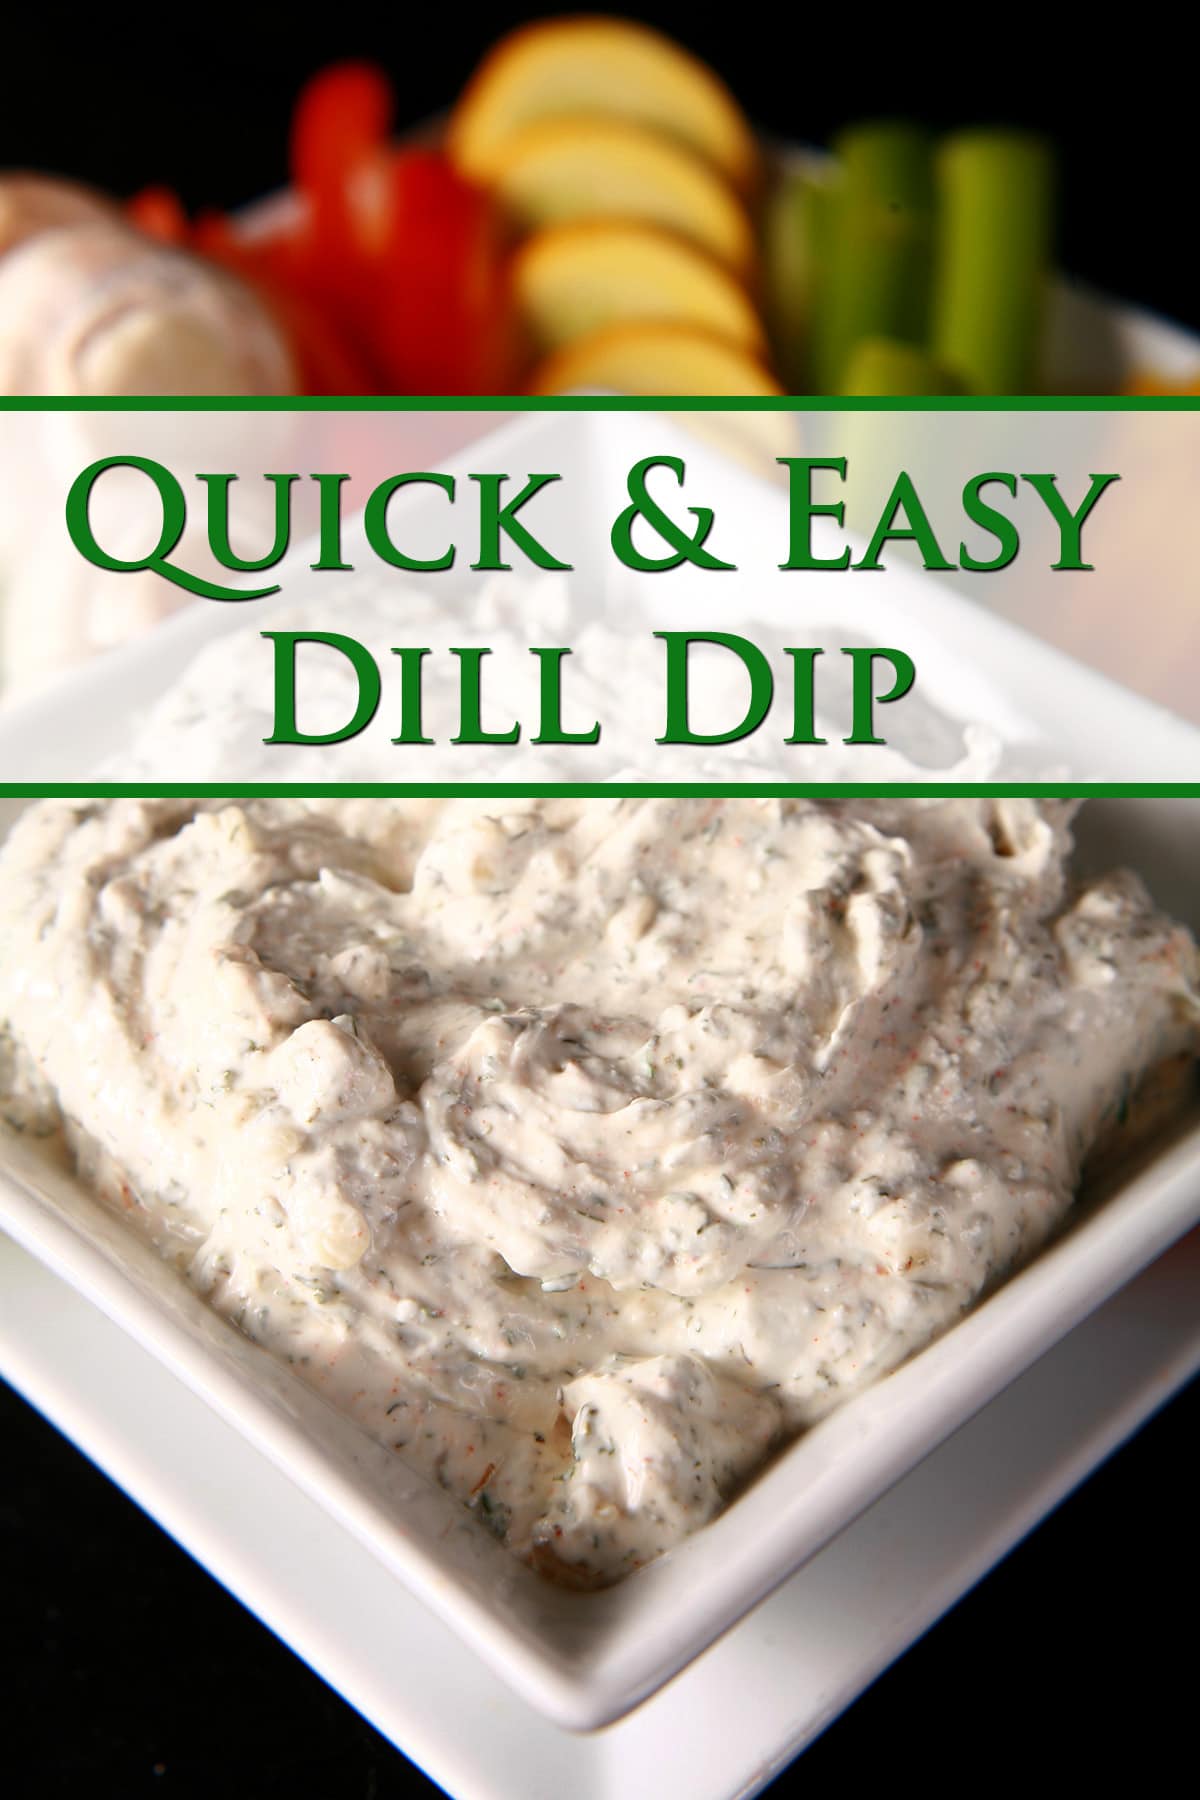 A close up view of a bowl of a thick veggie dip. It is white with green flecks throughout. Green text overlay says Quick and easy Dill Dip.